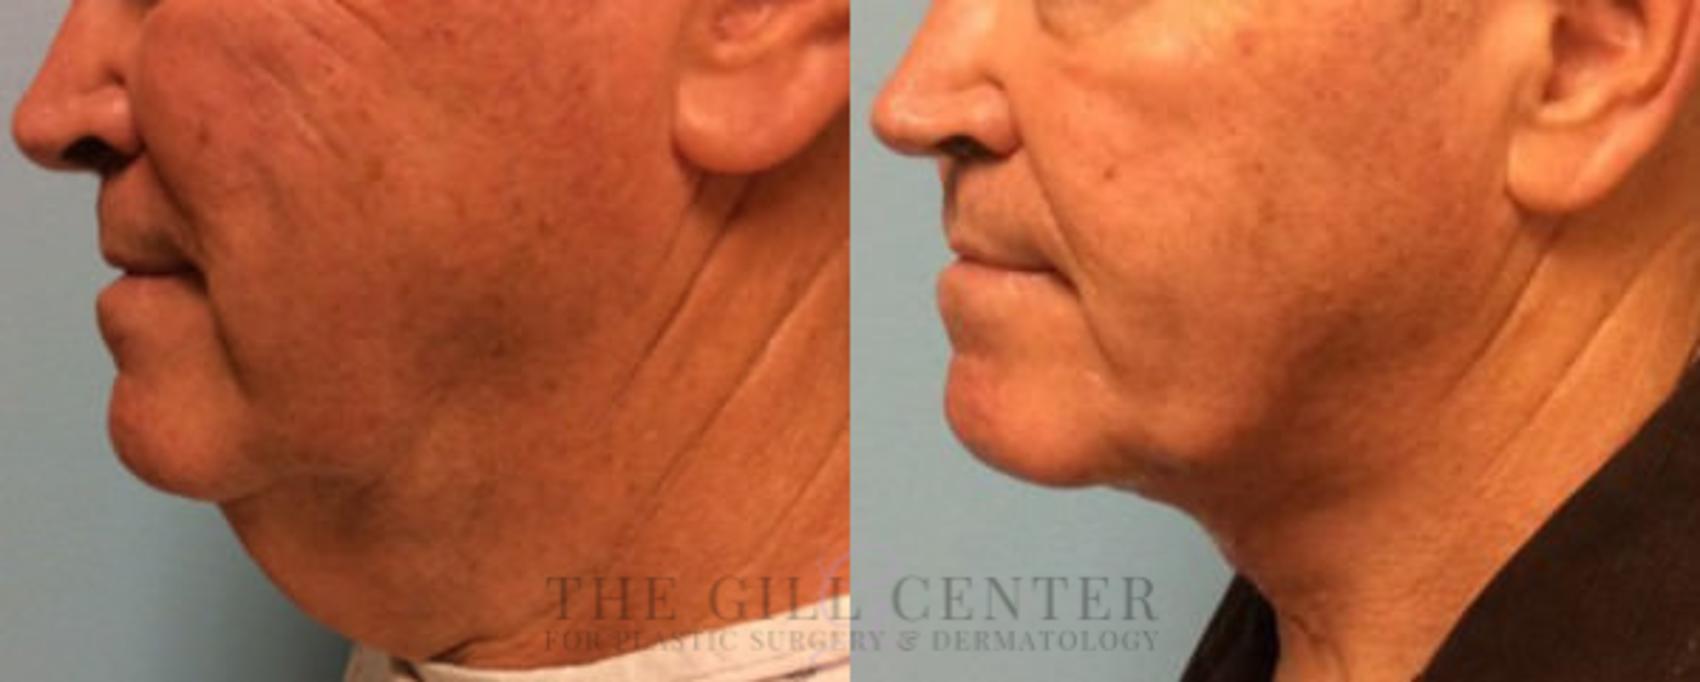 Face & Neck Lift Case 391 Before & After Left Side | The Woodlands, TX | The Gill Center for Plastic Surgery and Dermatology